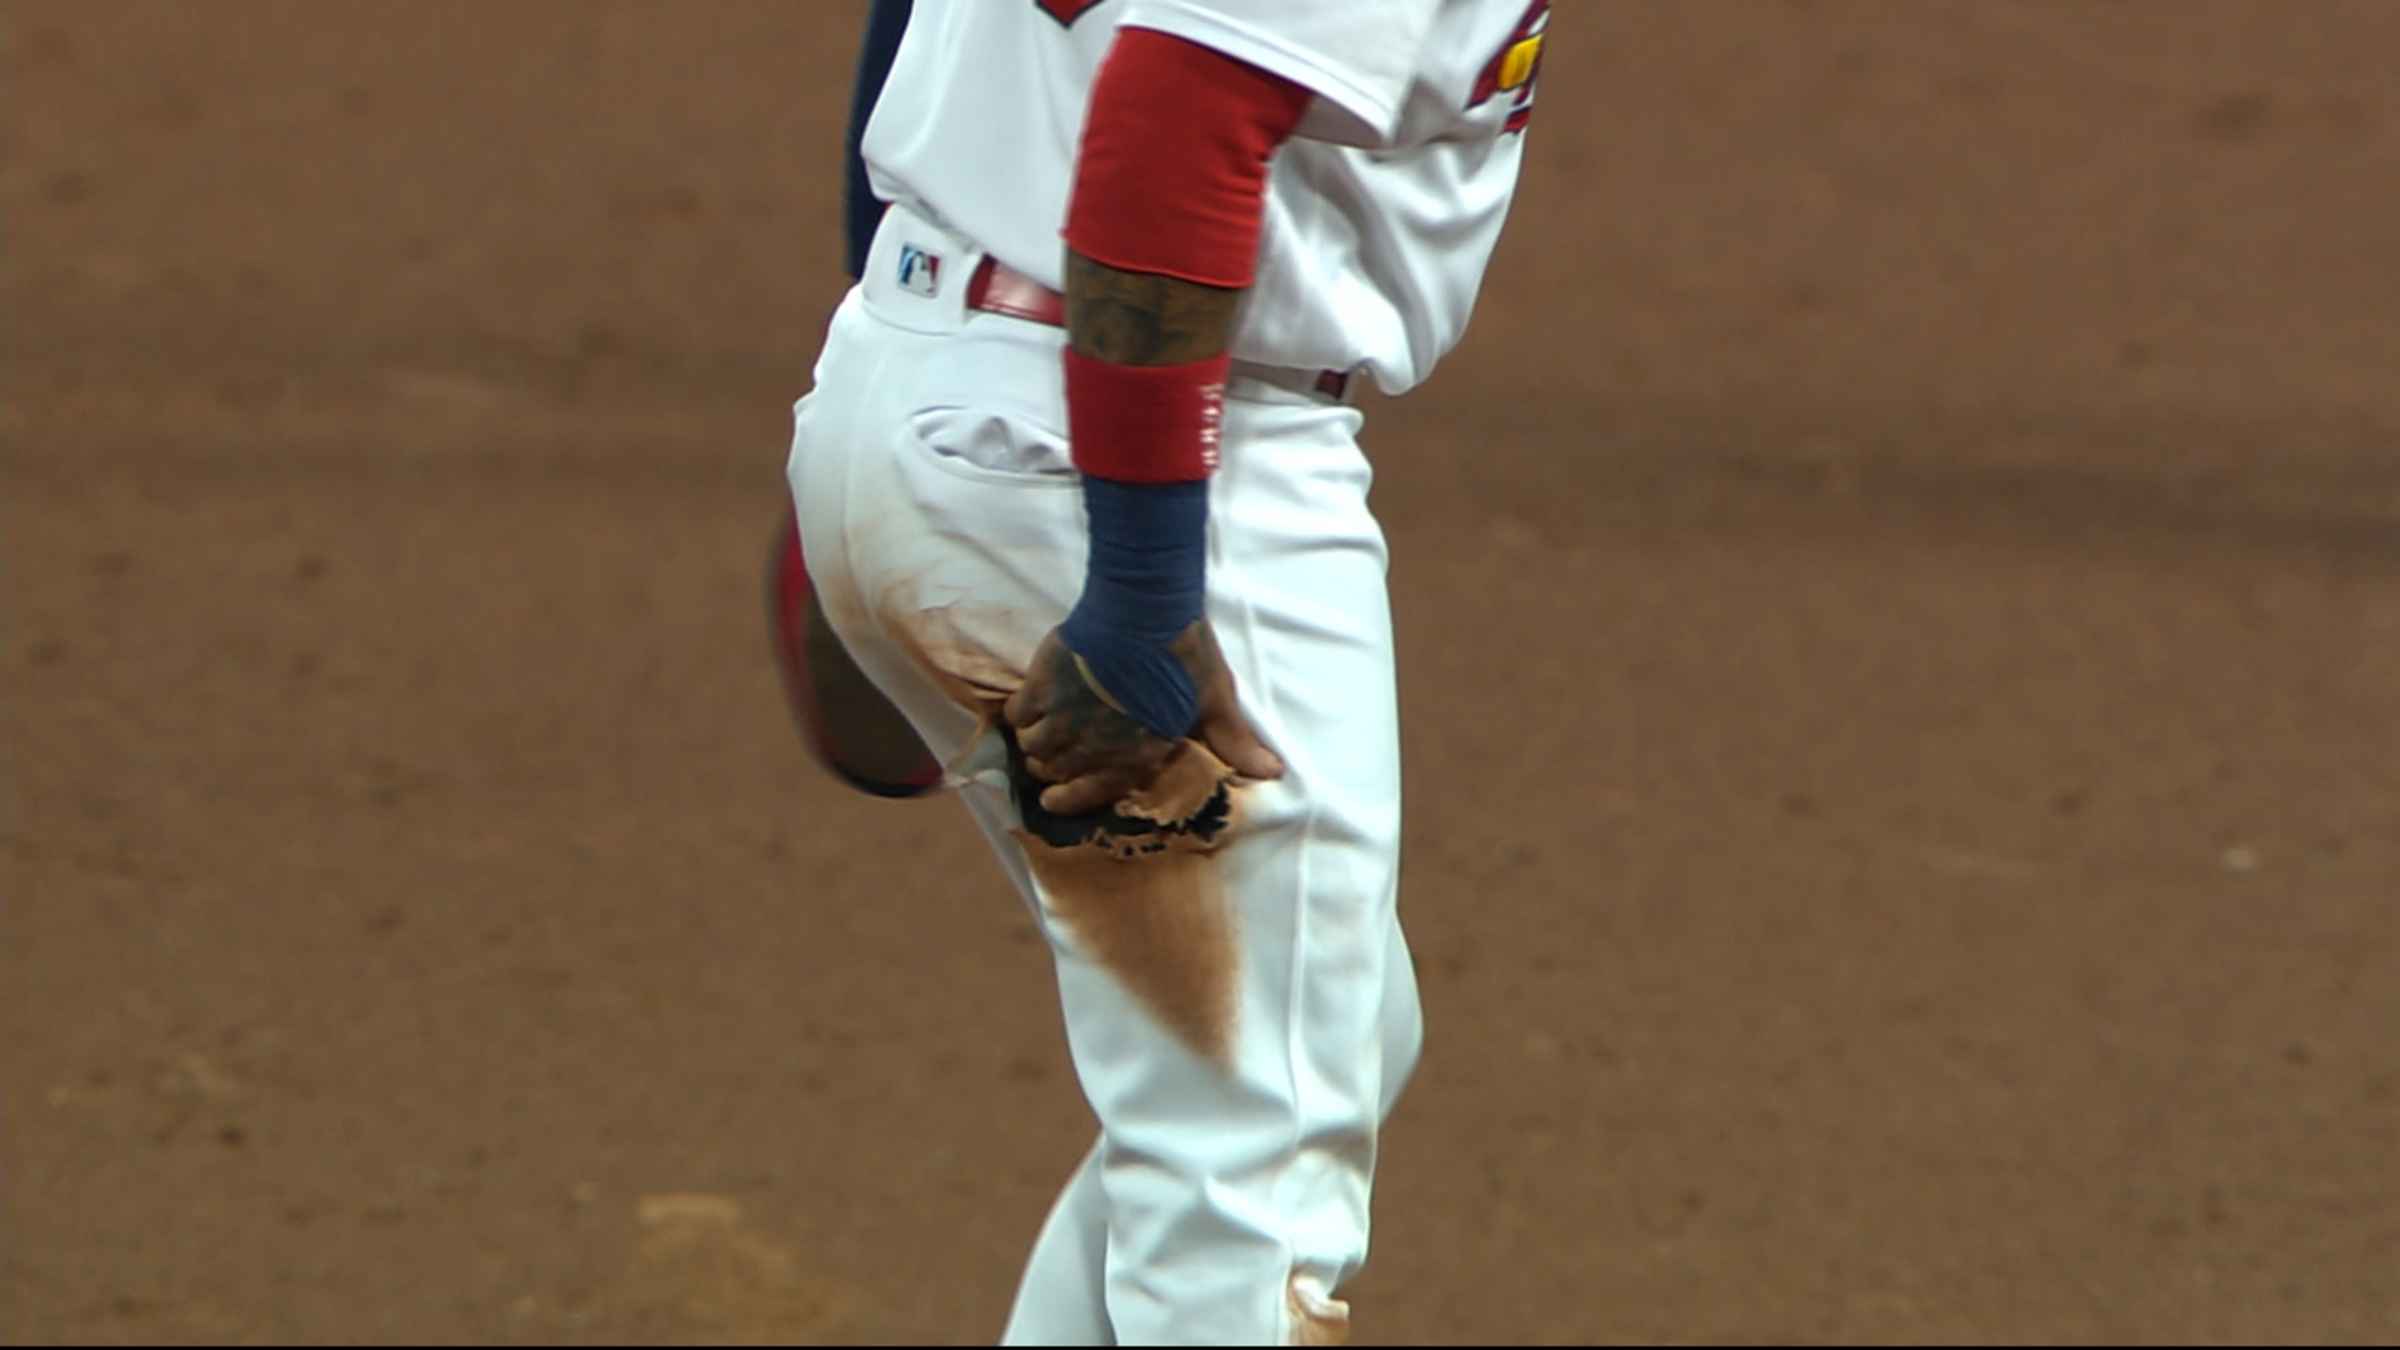 Why Do Baseball Players Wear Oven Mitts?